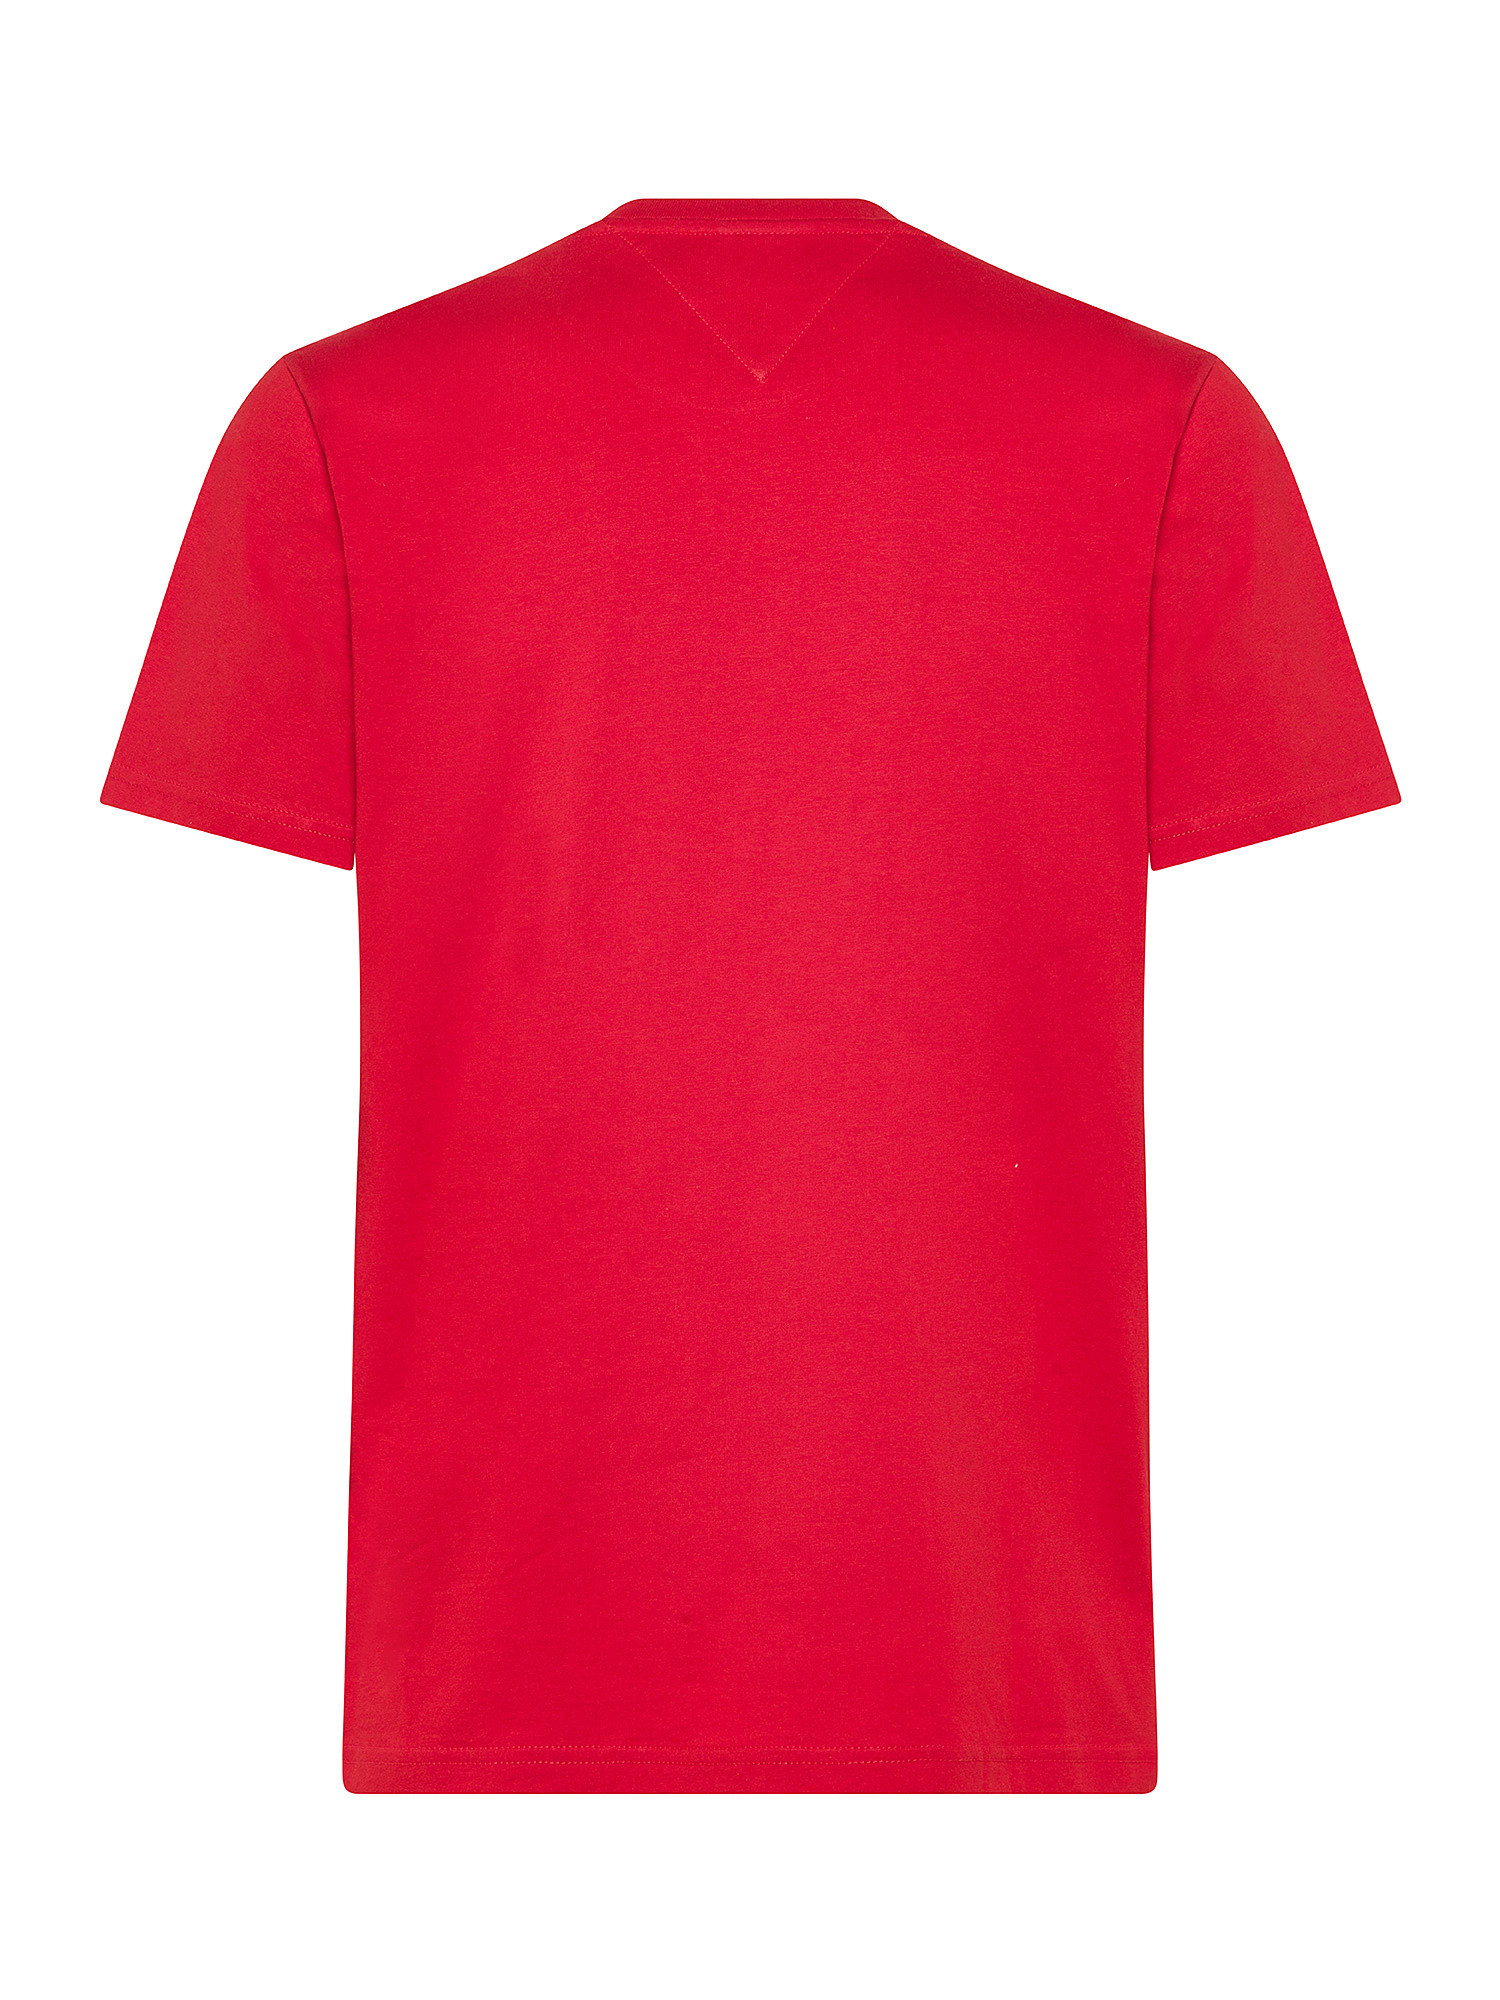 Tommy Jeans - T-shirt girocollo in cotone con stampa e logo, Rosso, large image number 1